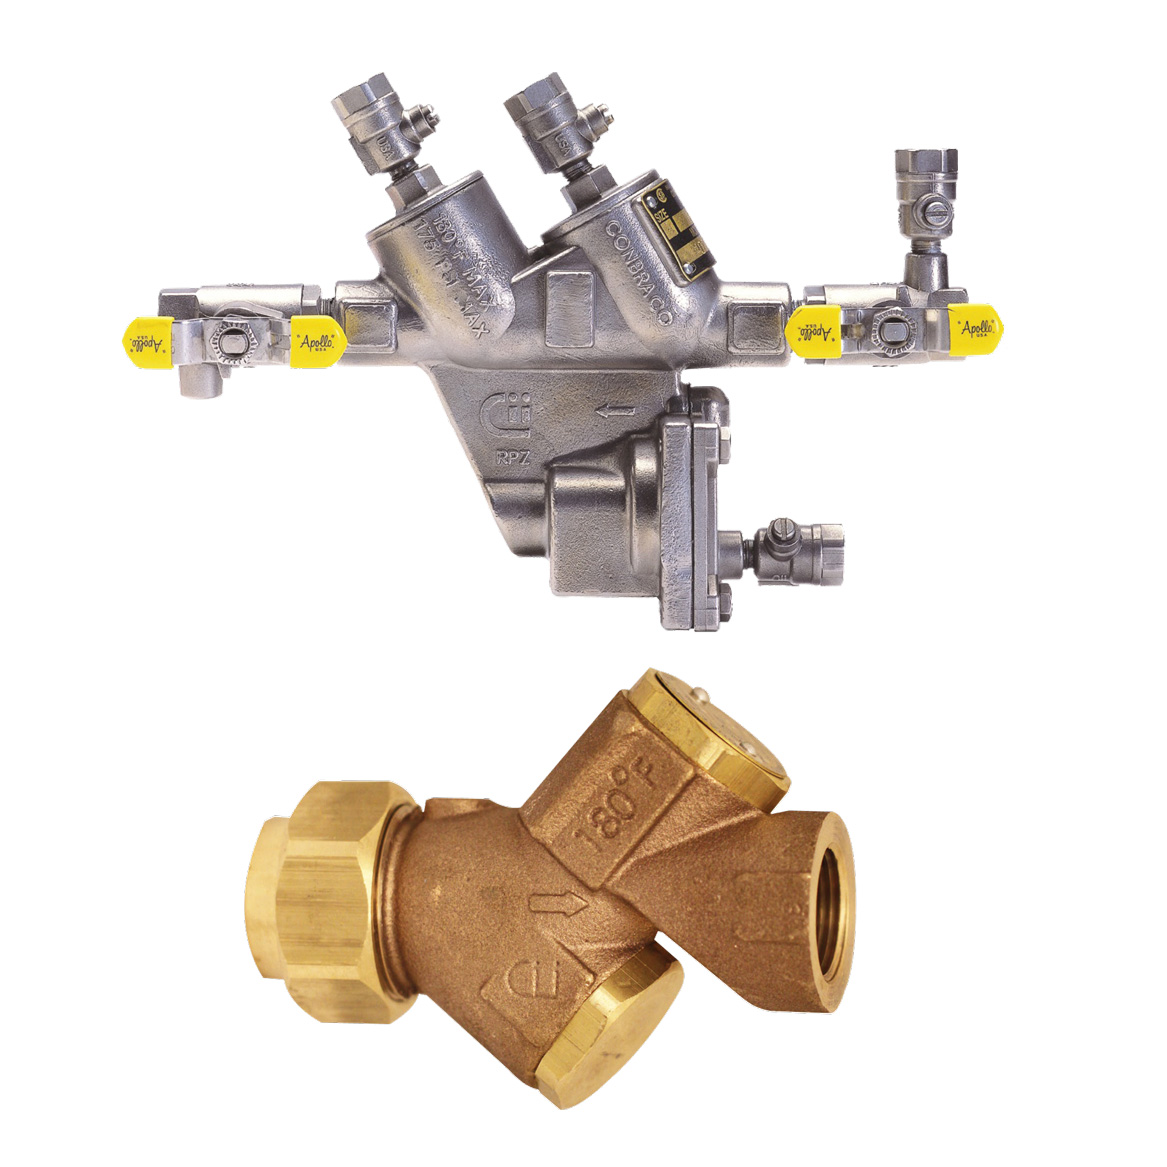 Hydronic/Water Valves